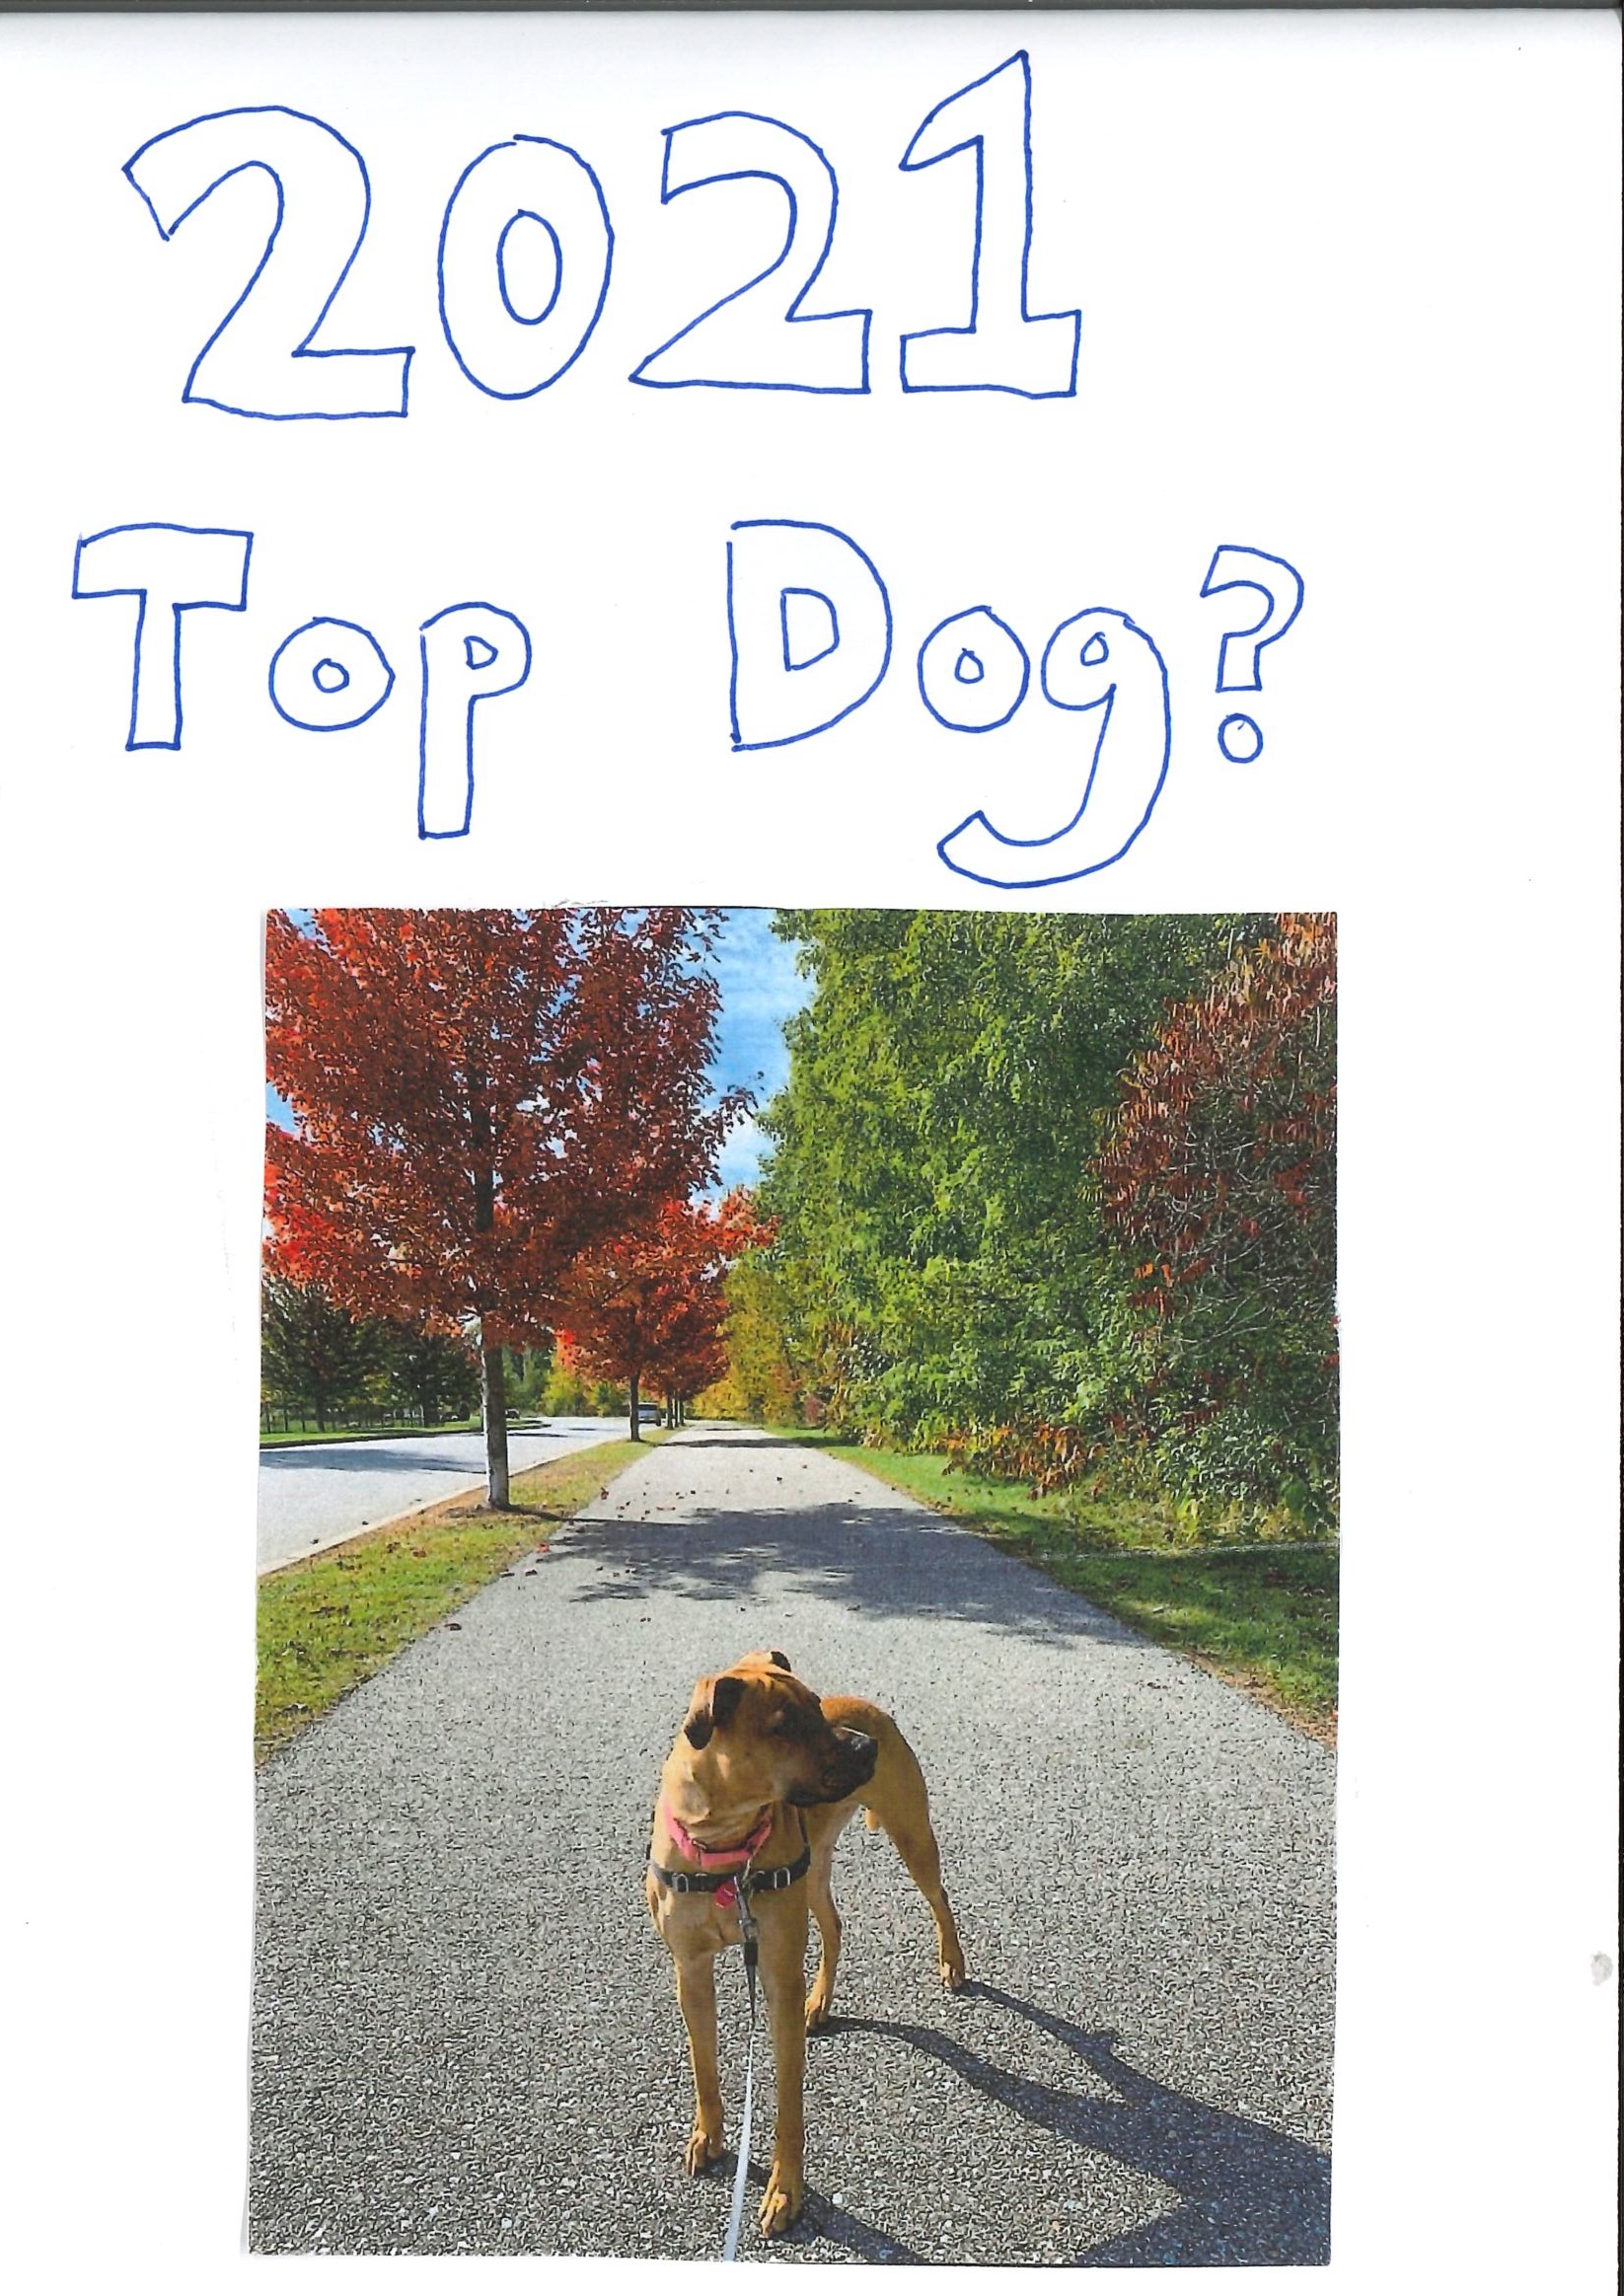 top dog candidate_Page_1